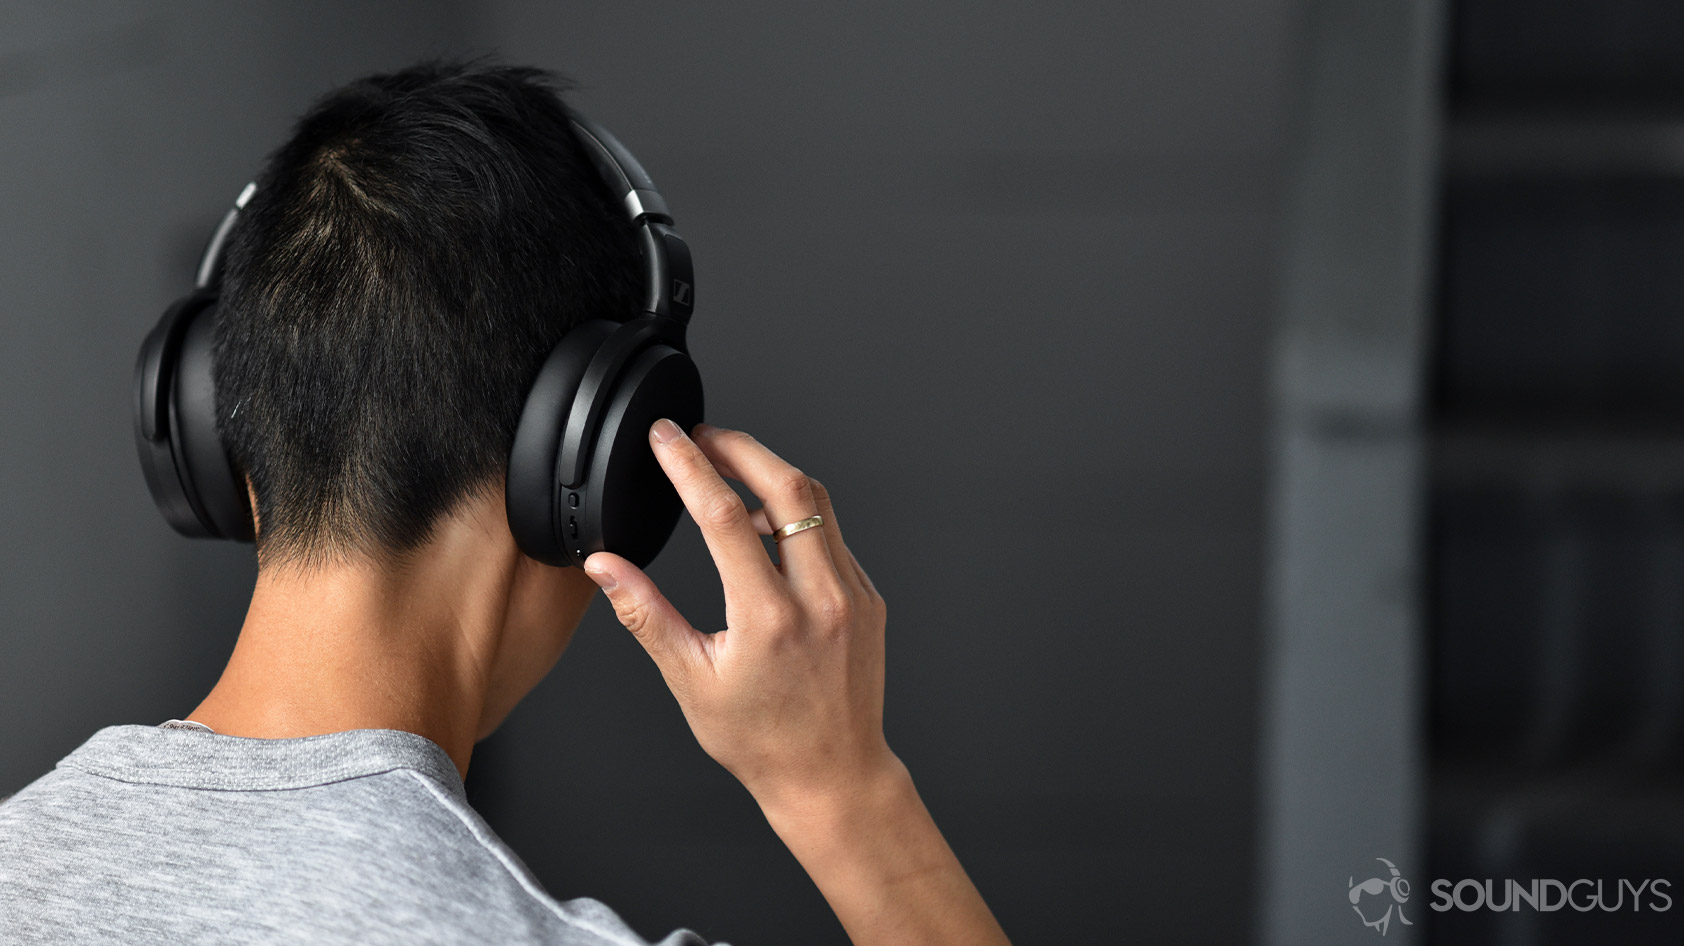 The Sennheiser HD 450BT noise canceling headphones worn by a woman as she adjusts the volume via the onboard controls on the right ear cup.